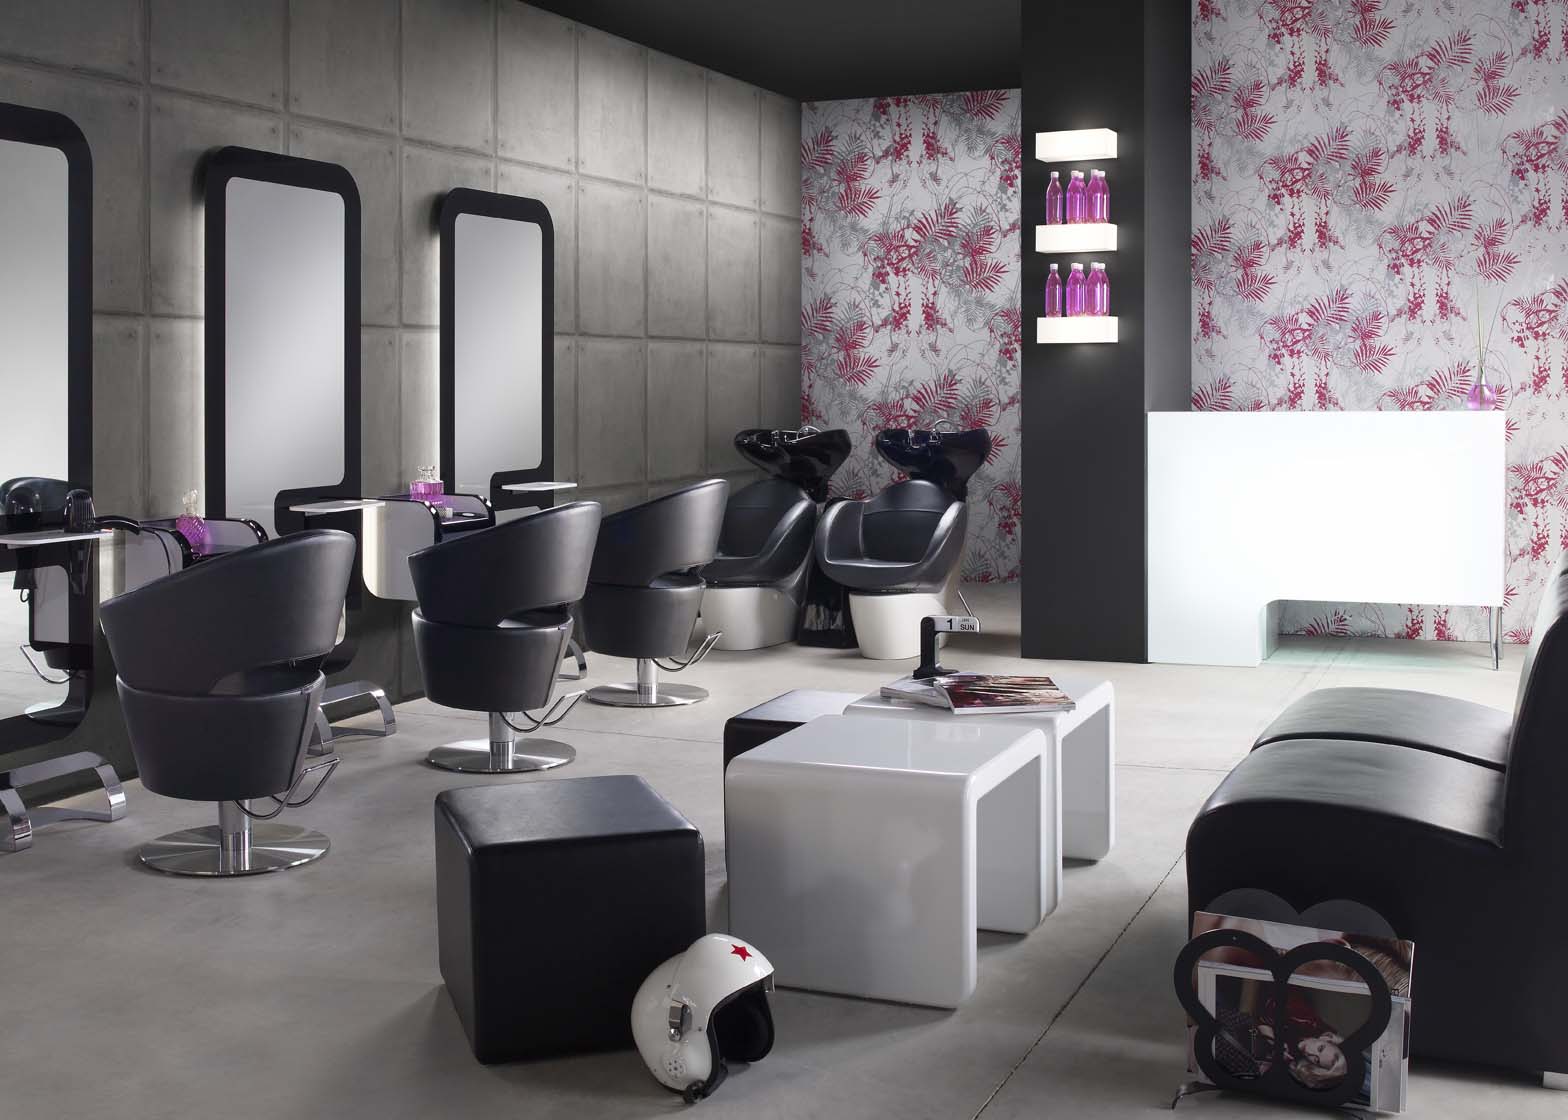 Beauty junctions of salons, spas evolving to become wellness centers for people